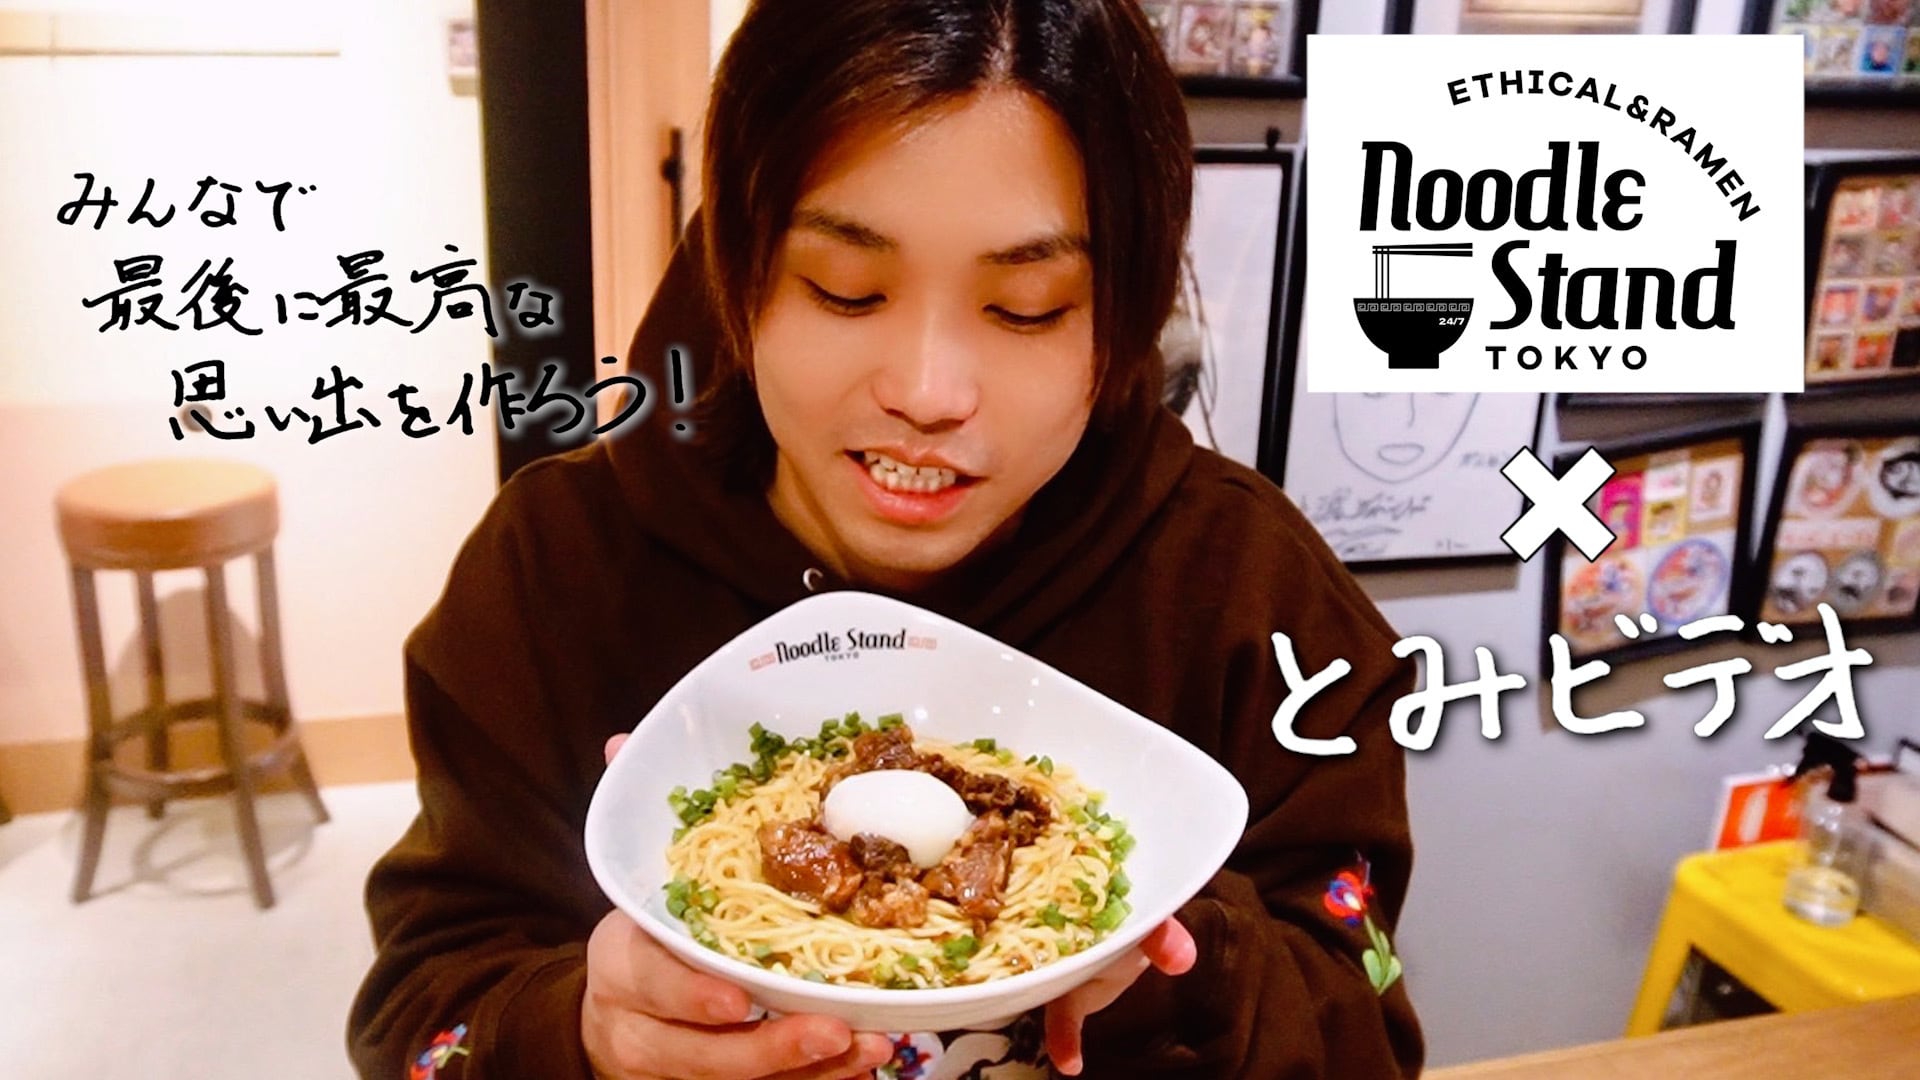 Stand　3食入り)トミーのヌースタ思い出セット　Tokyo　Noodle　黒潮拉麺